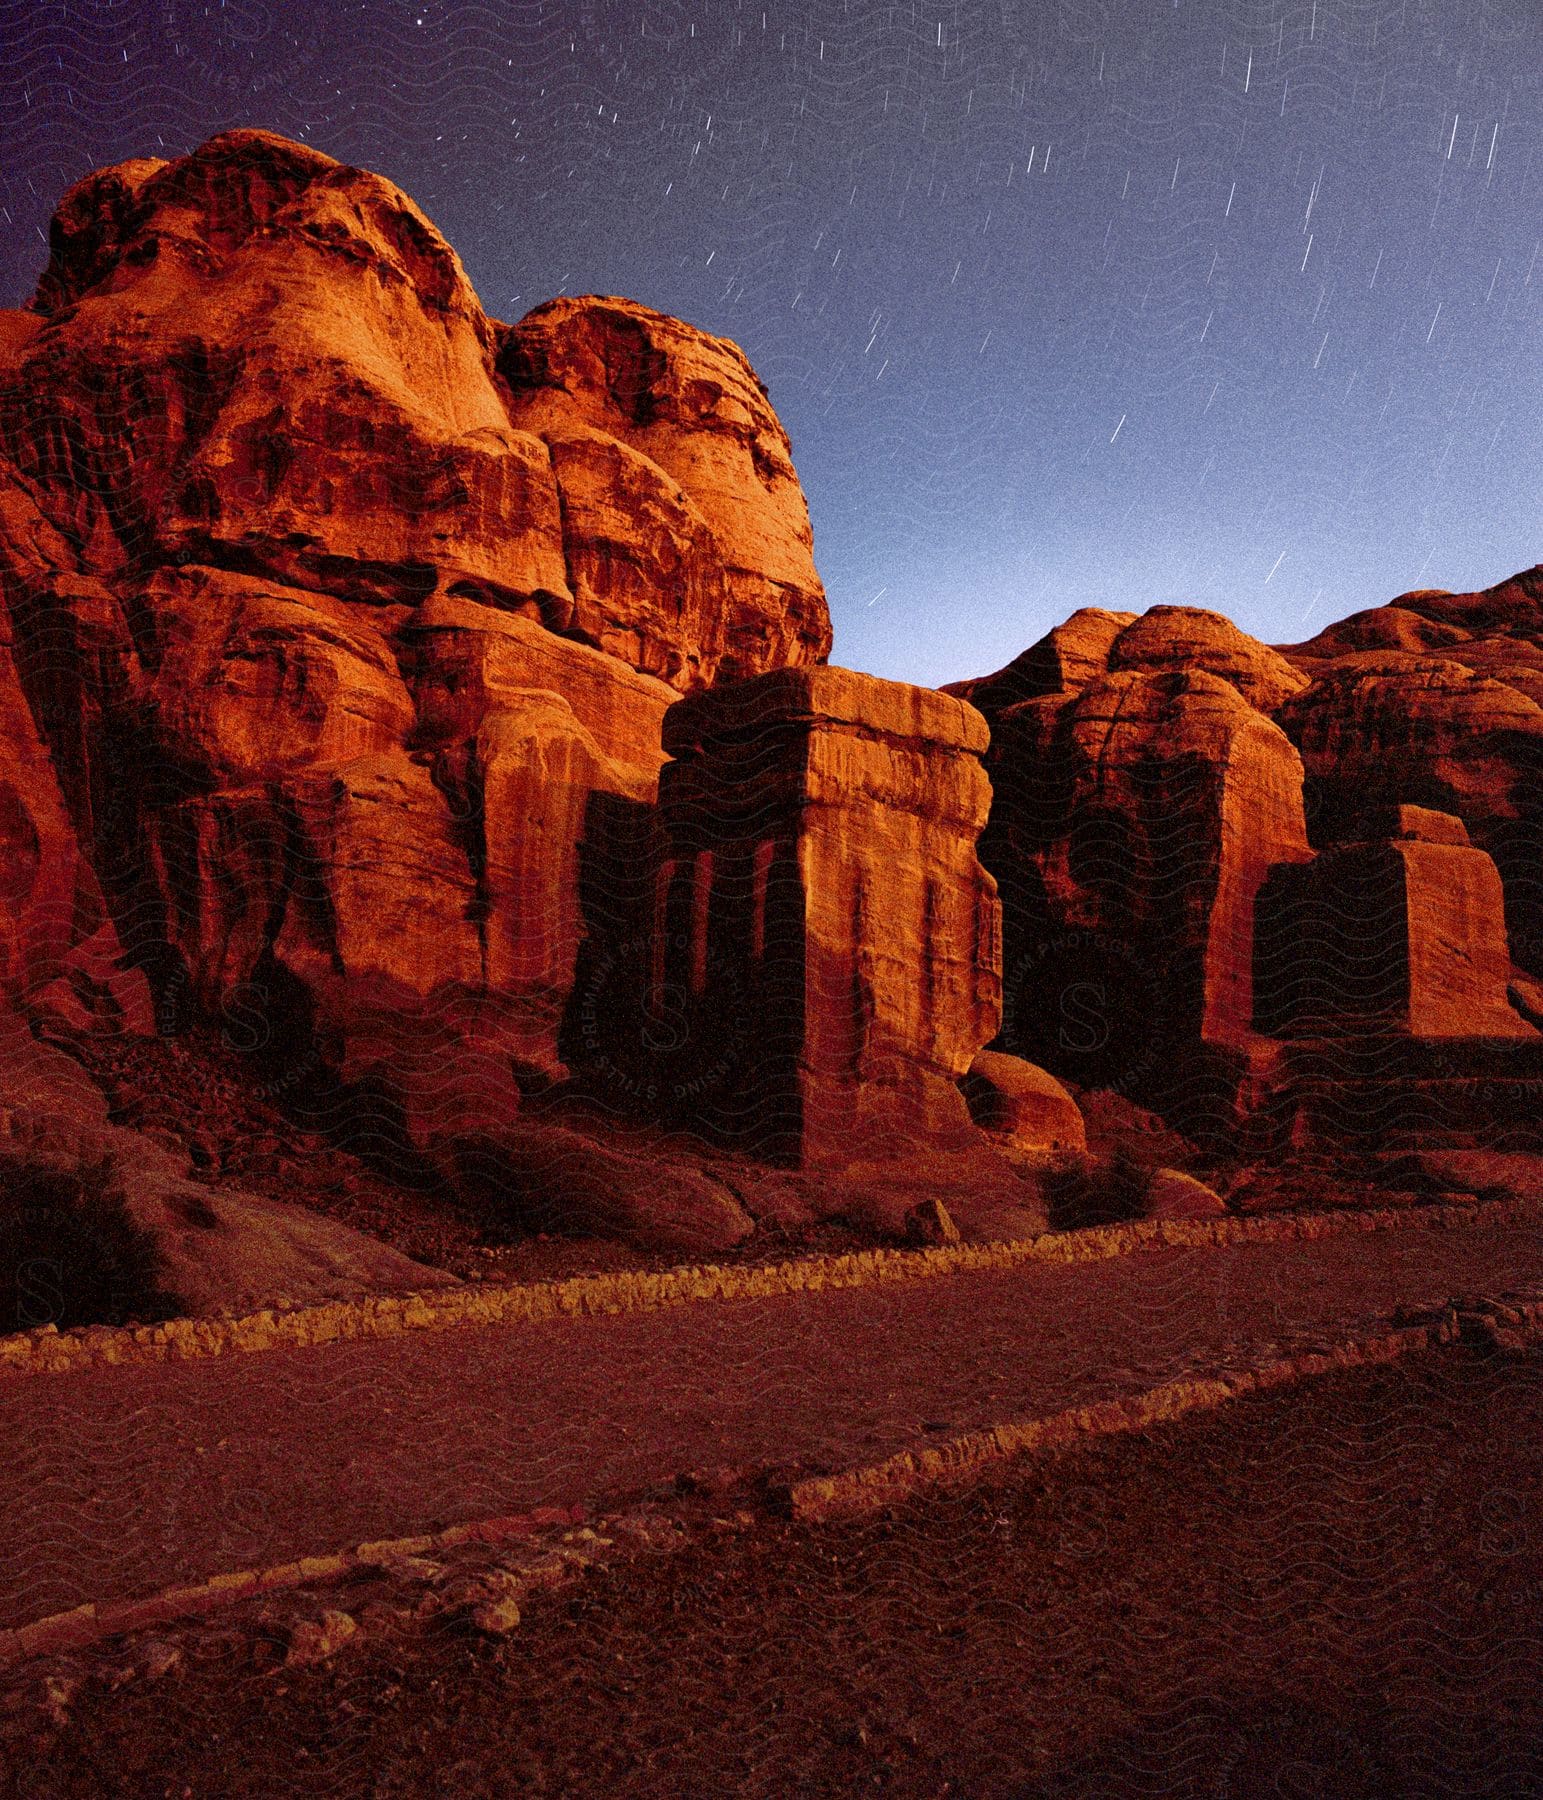 The stars shine above red rock canyons in petra jordan at night